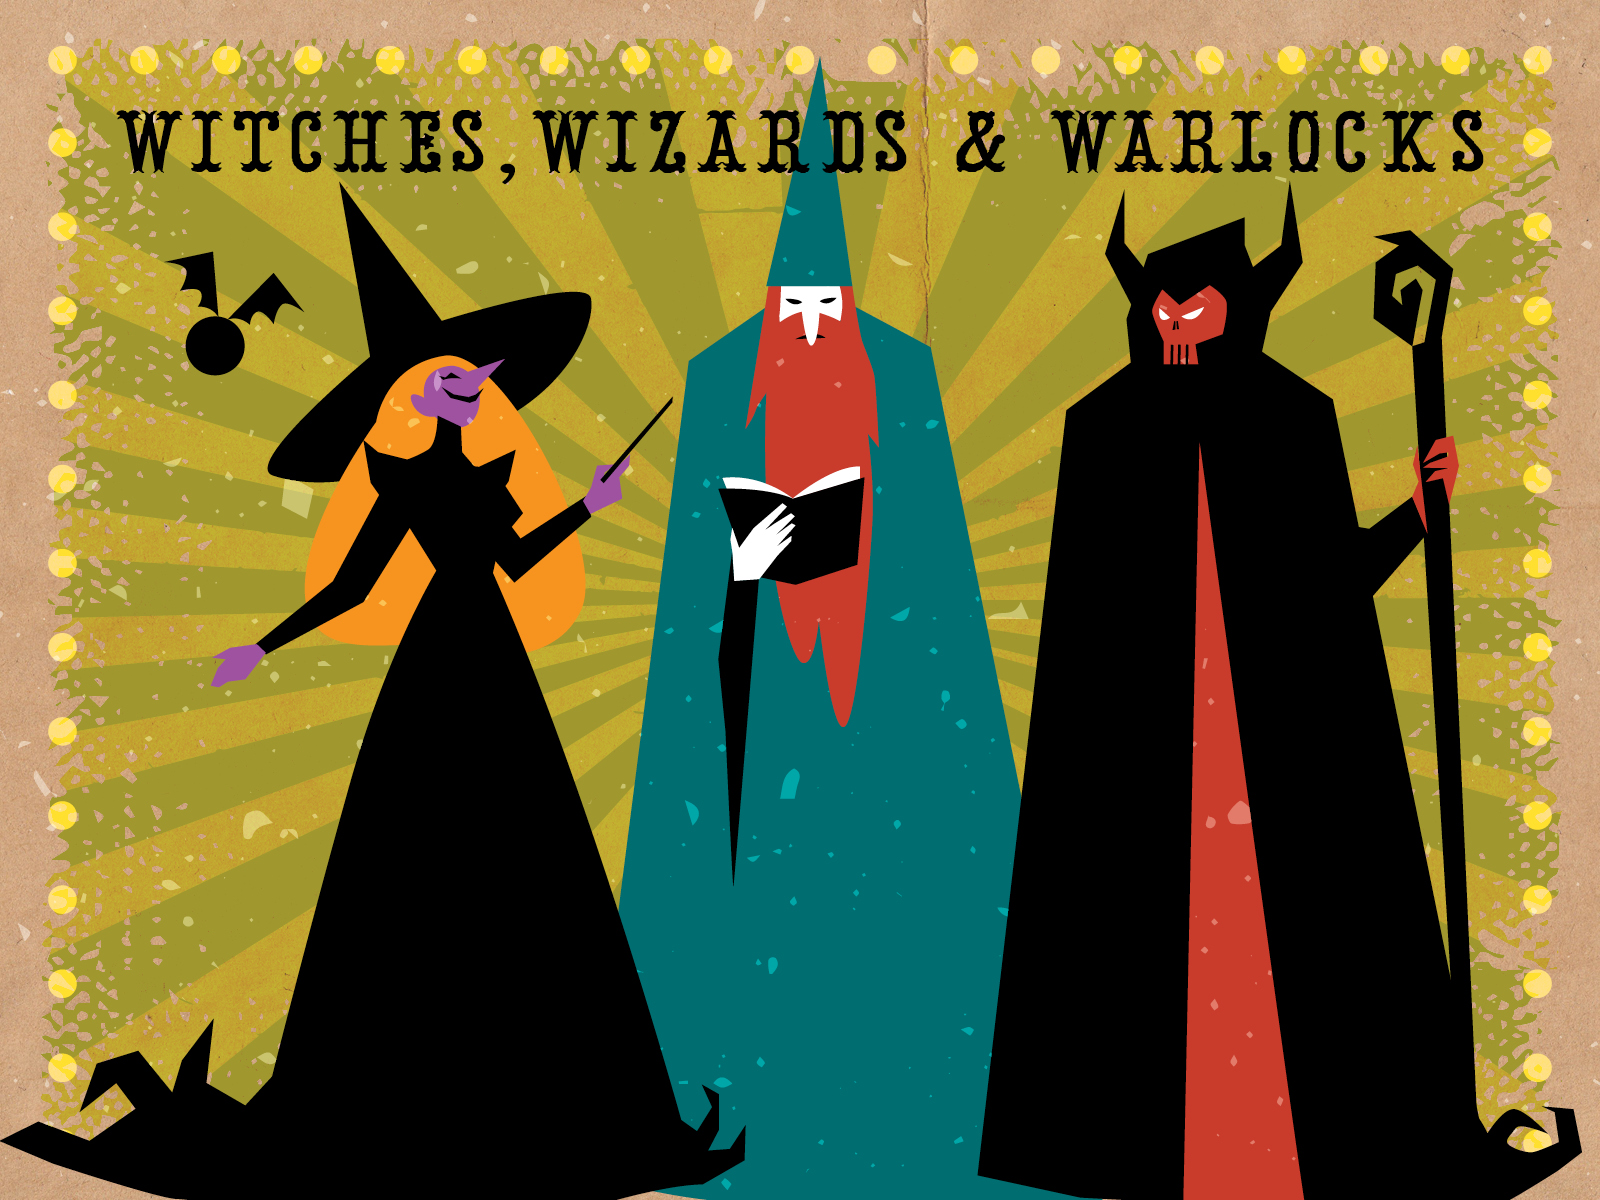 graphic image of witch, wizard, and warlock characters